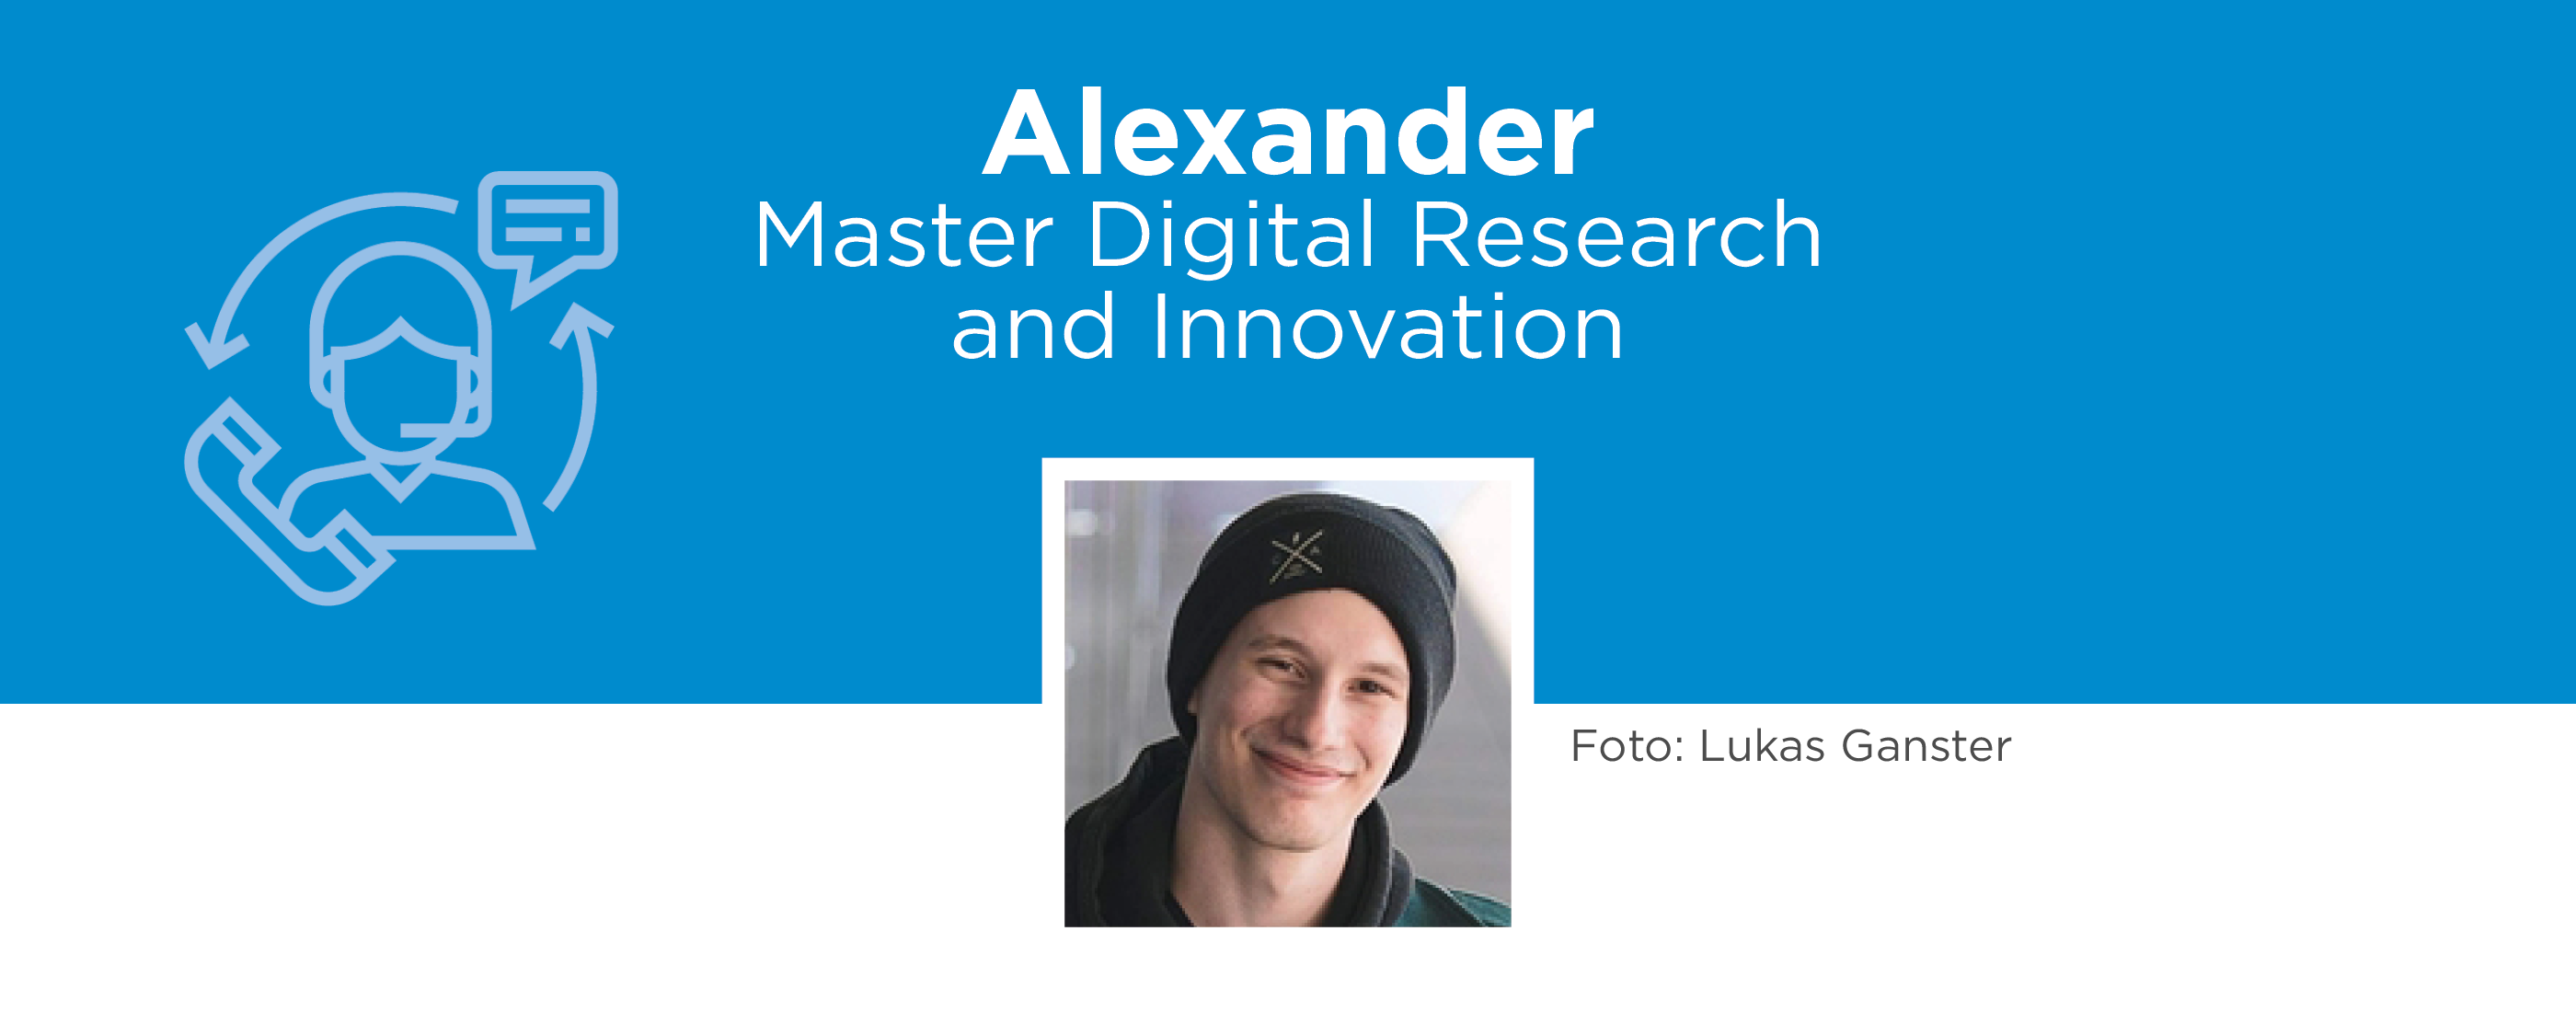 Alexander: Master Digital Innovation and Research